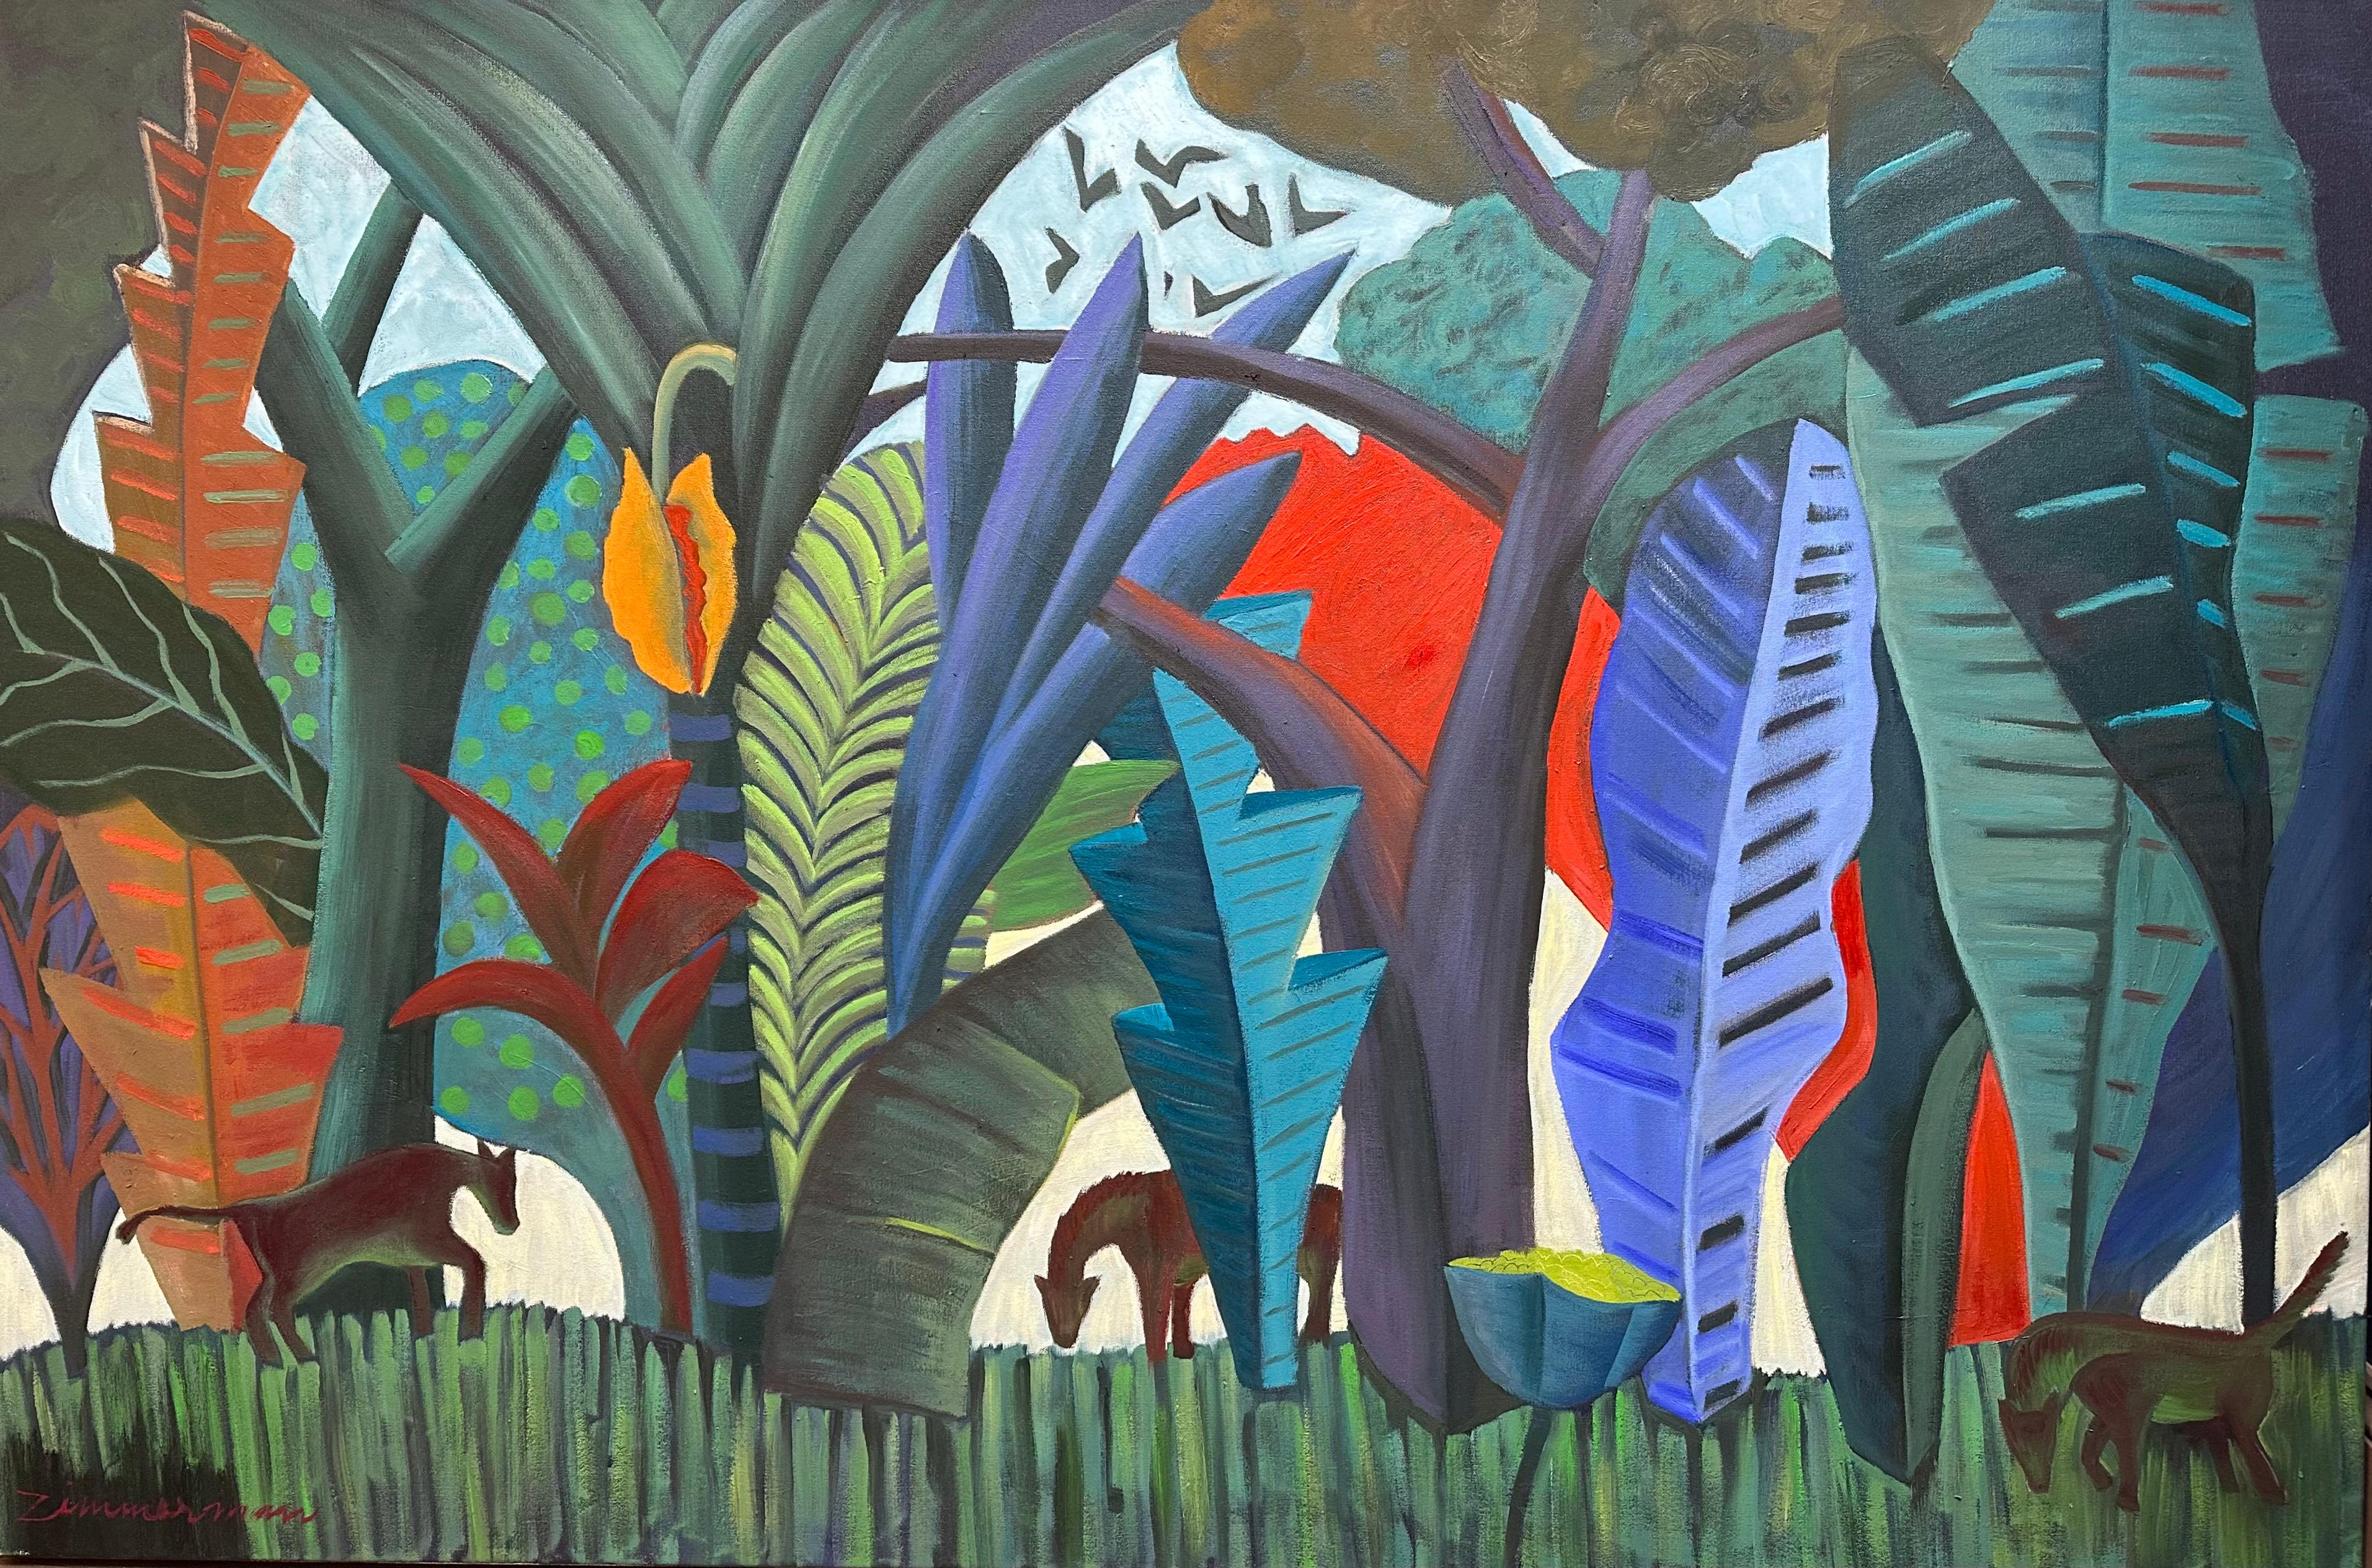 Jungle Rhapsody by Marc Zimmerman

Marc Zimmerman creates playful paintings, whether deep mysterious jungle or delightfully whimsical florals. His color palette explores various harmonies yet always surprises with new color excitement. Years of